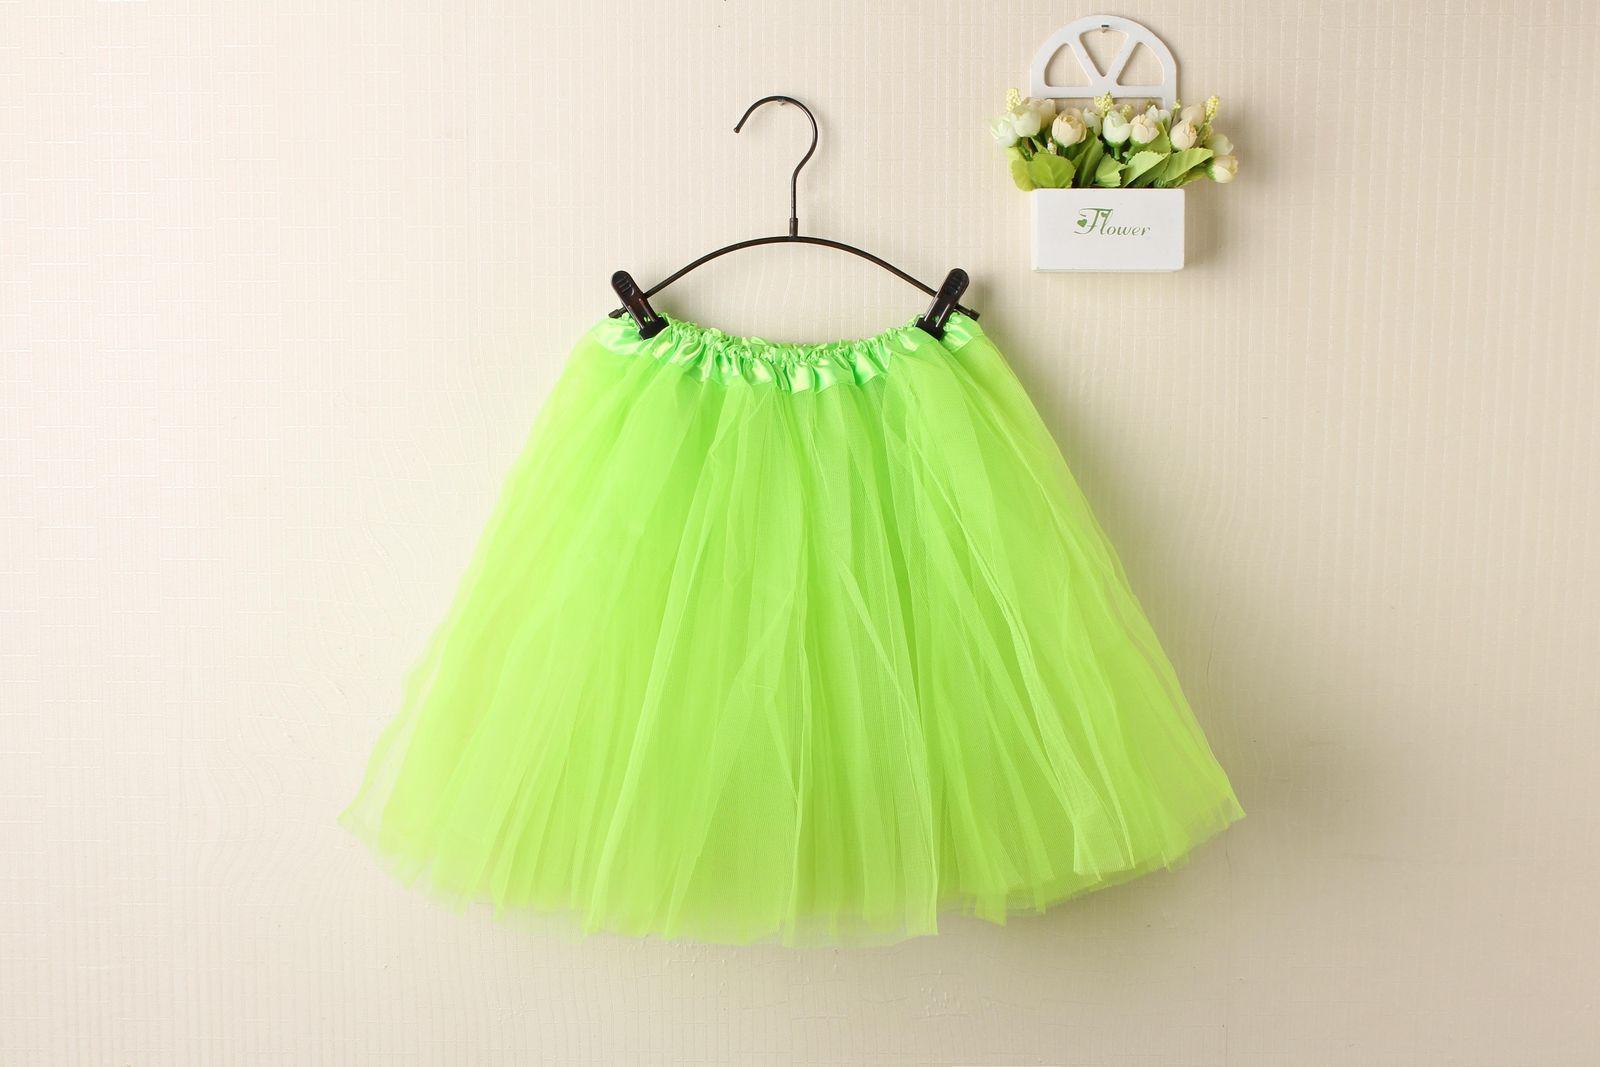 New Adults Tulle Tutu Skirt Dressup Party Costume Ballet Womens Girls Dance Wear - Neon Green (Size: Adults)